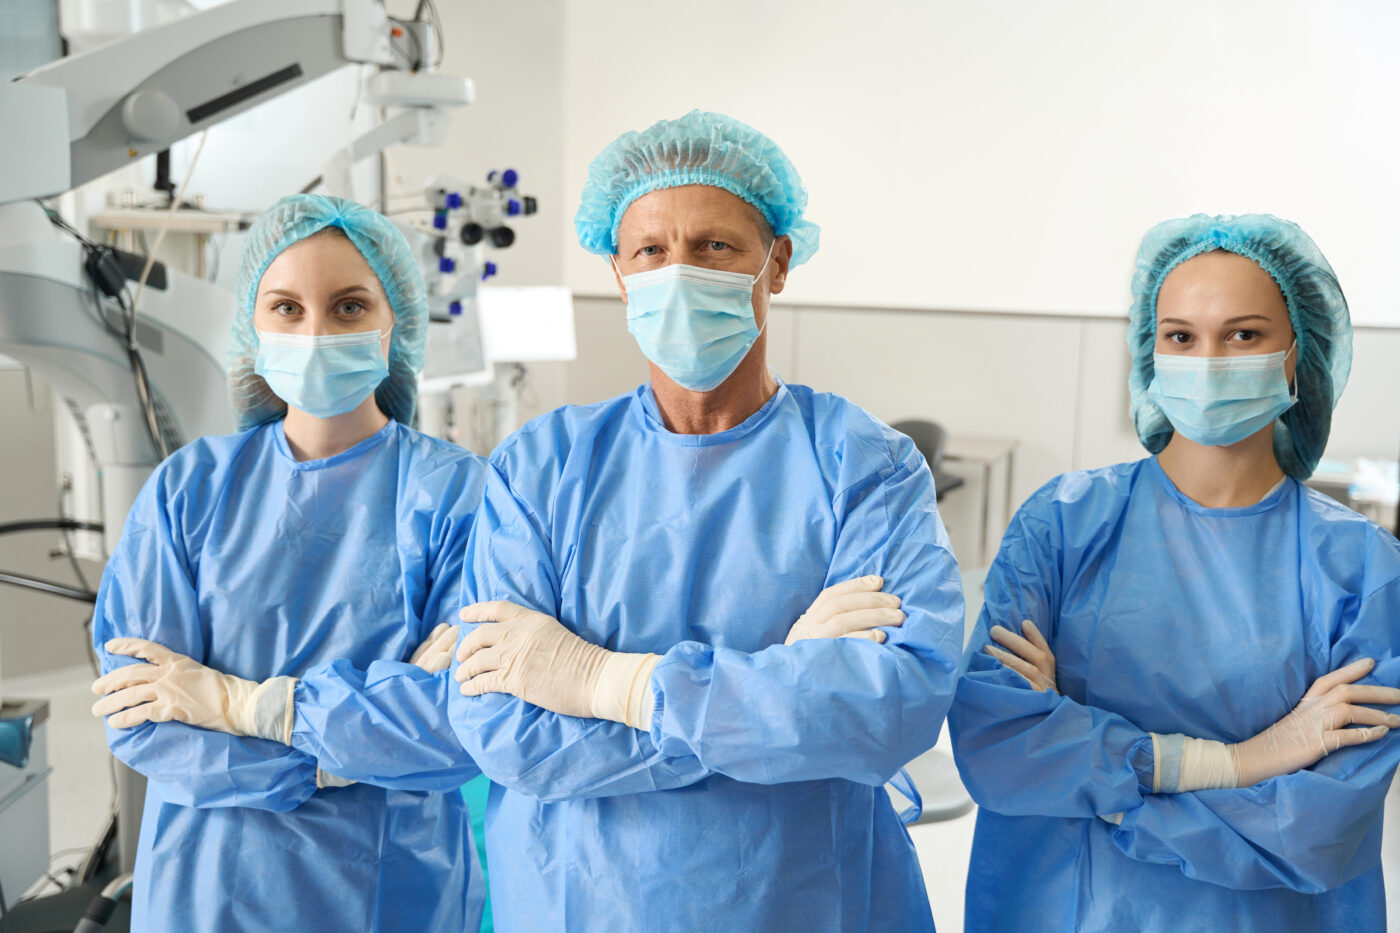 Anesthesiologists, Certified Registered Nurse Anesthetists (CRNAs), and Anesthesiologist Assistants